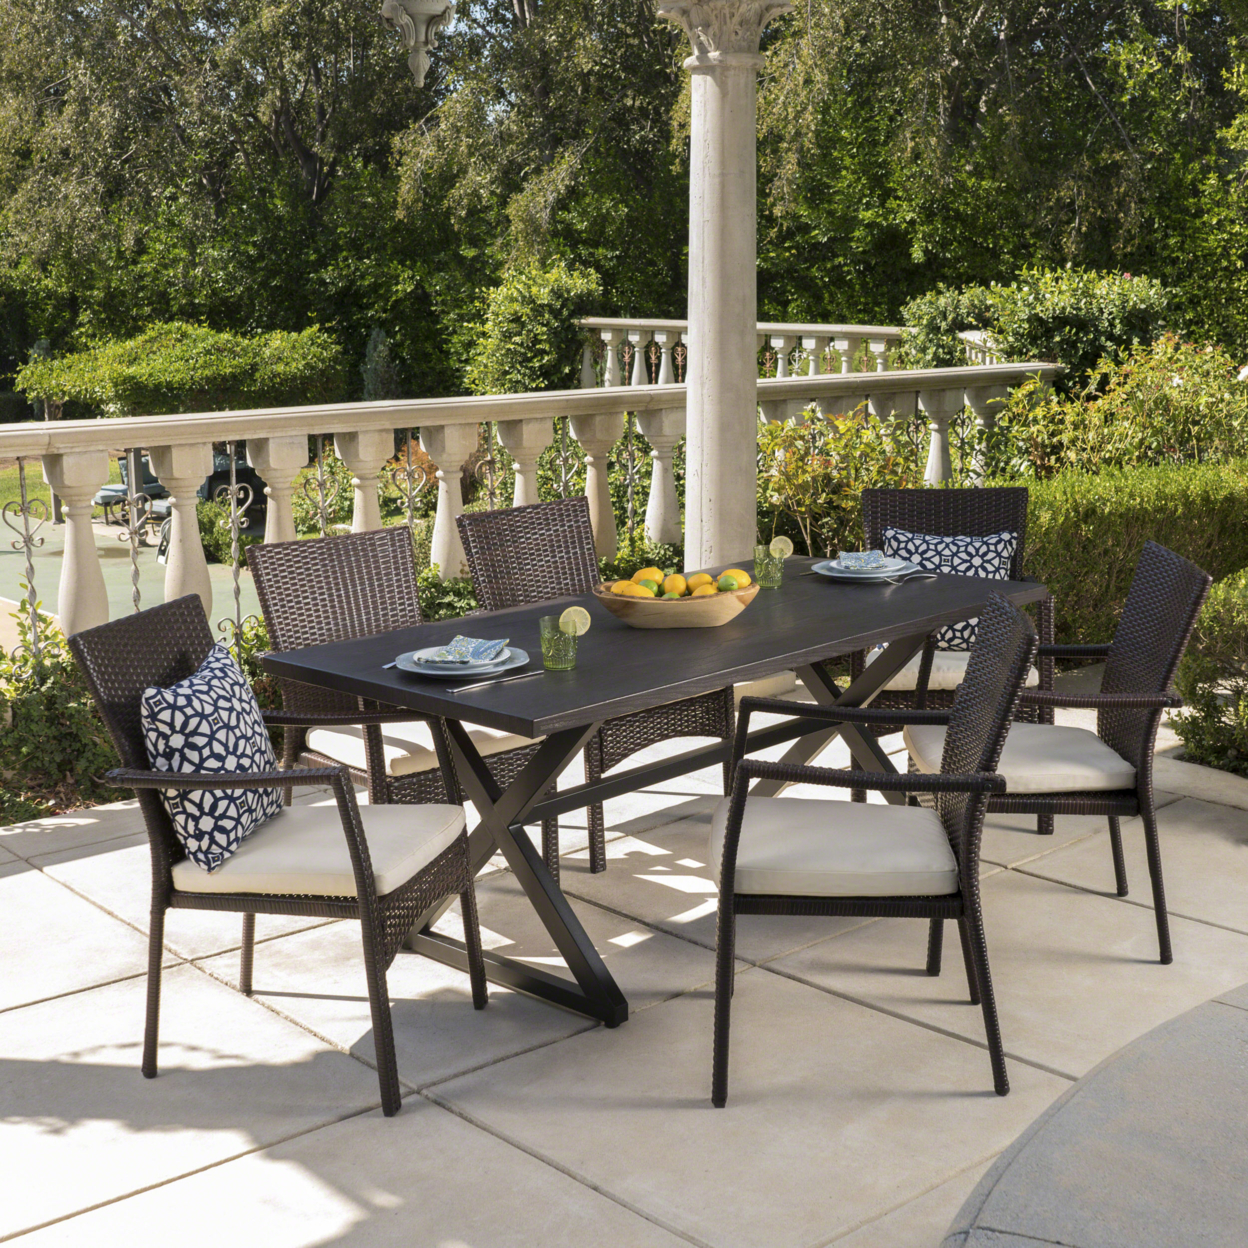 Adelade Outdoor 7 Piece Aluminum Dining Set With Wicker Dining Chairs - Black/Brown